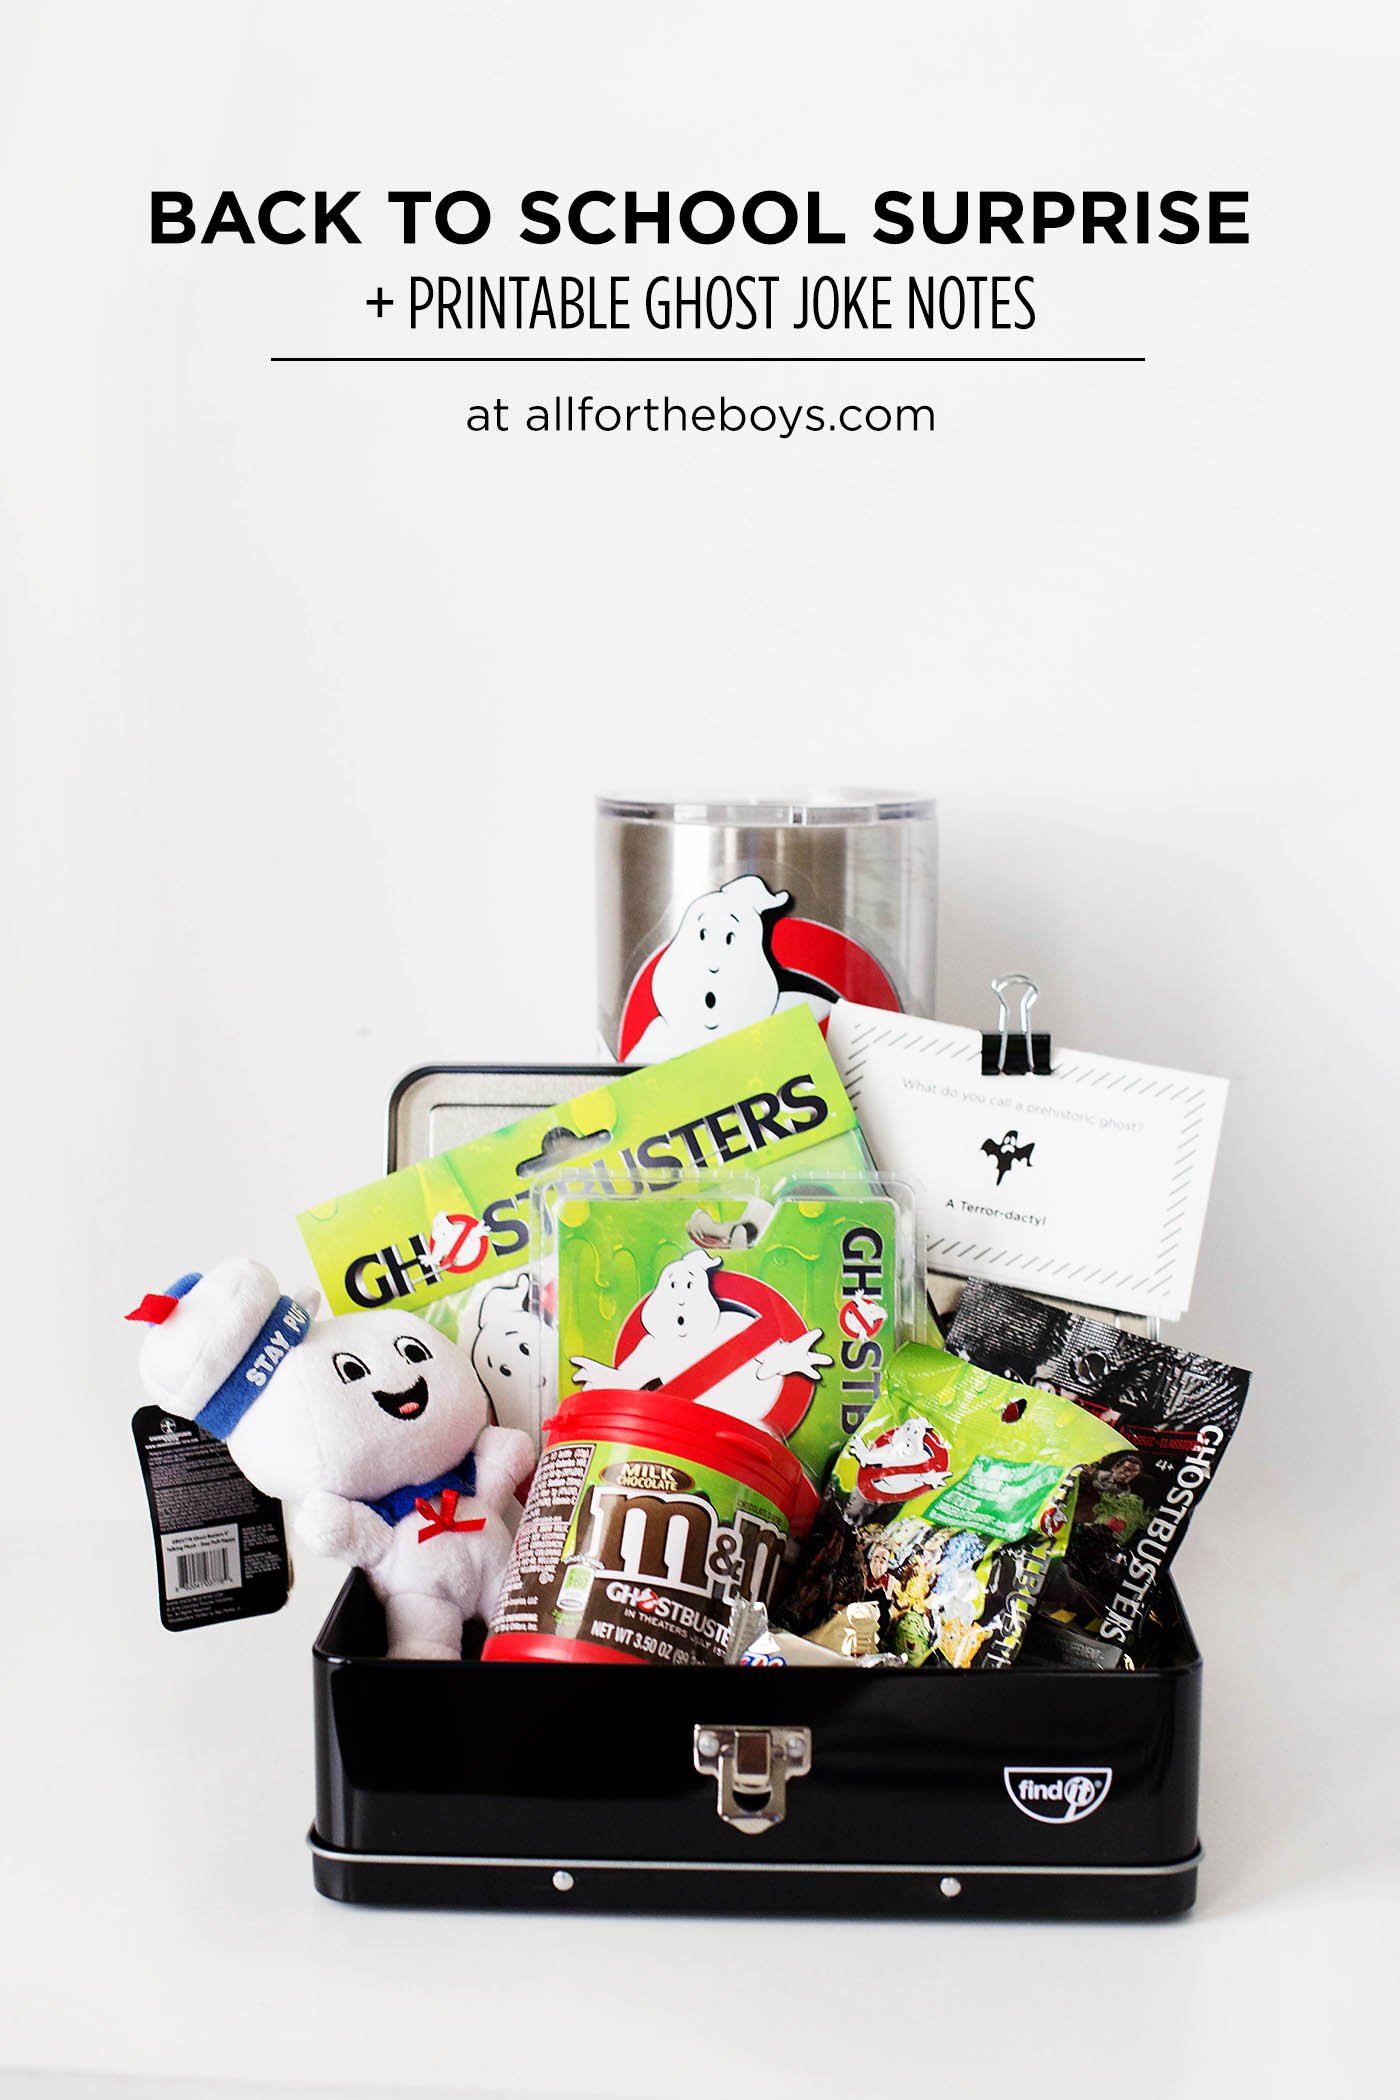 Back to School Ghostbusters themed surprise with printable lunchbox ghost joke notes